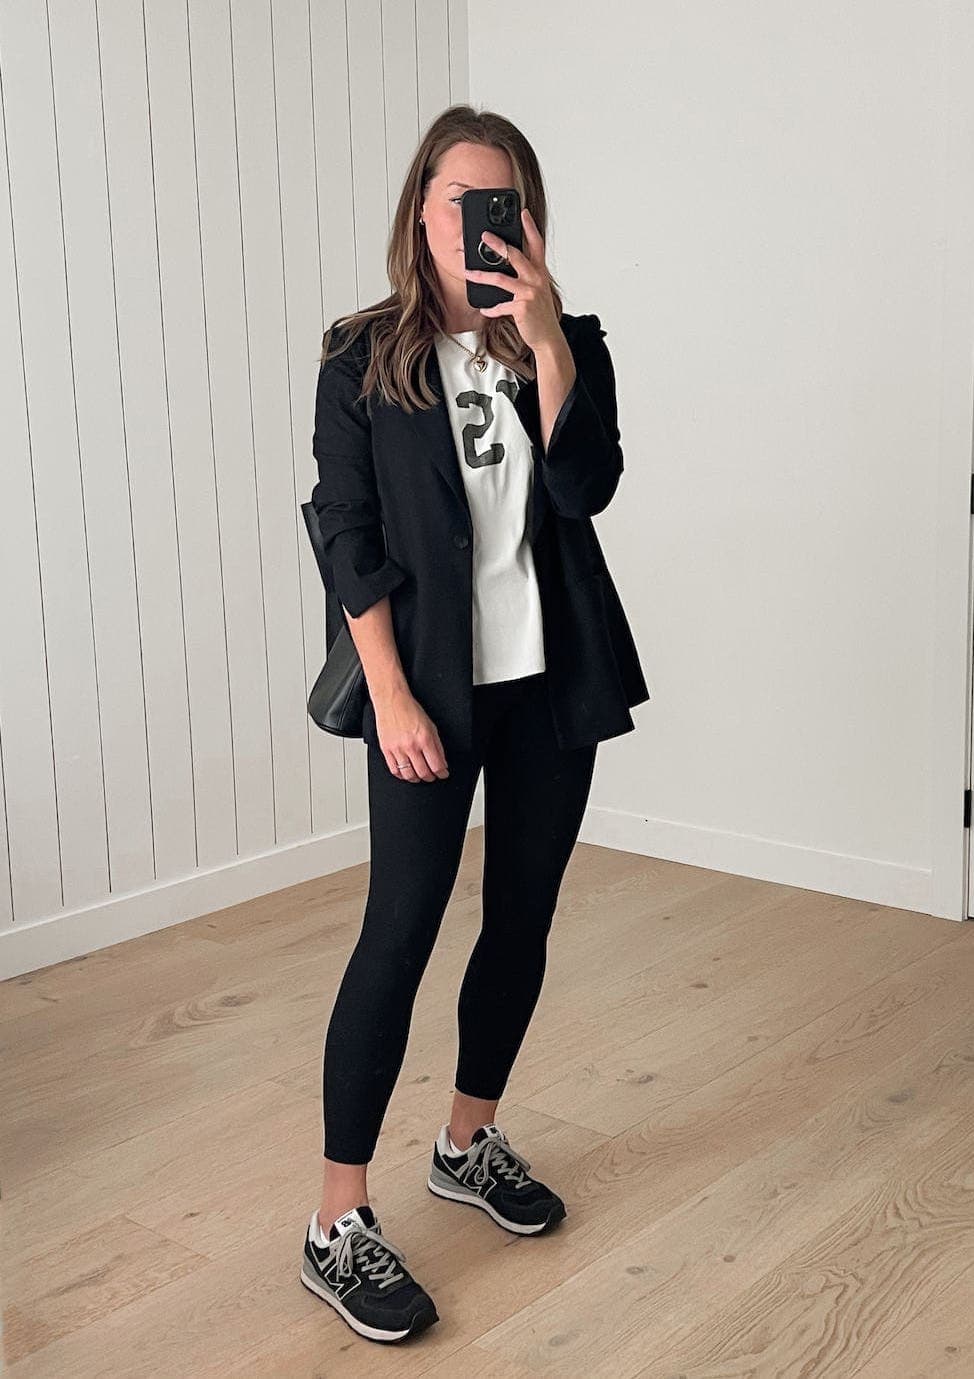 woman wearing a black blazer outfit with a white t-shirt, black leggings, and black sneakers